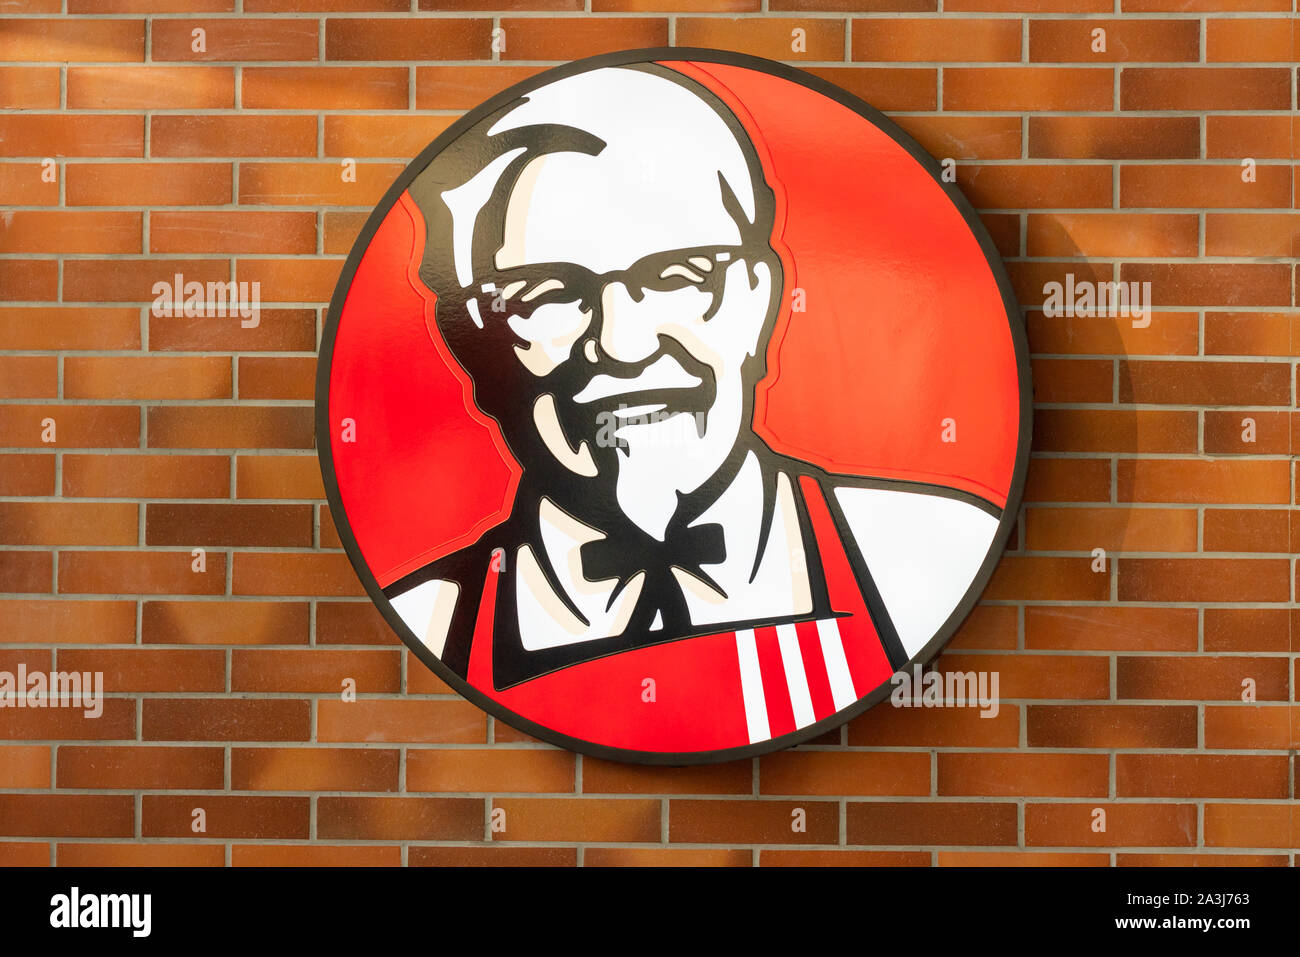 Contact Details - Kfc New Logo 2018 Transparent PNG - 1024x1293 - Free  Download on NicePNG